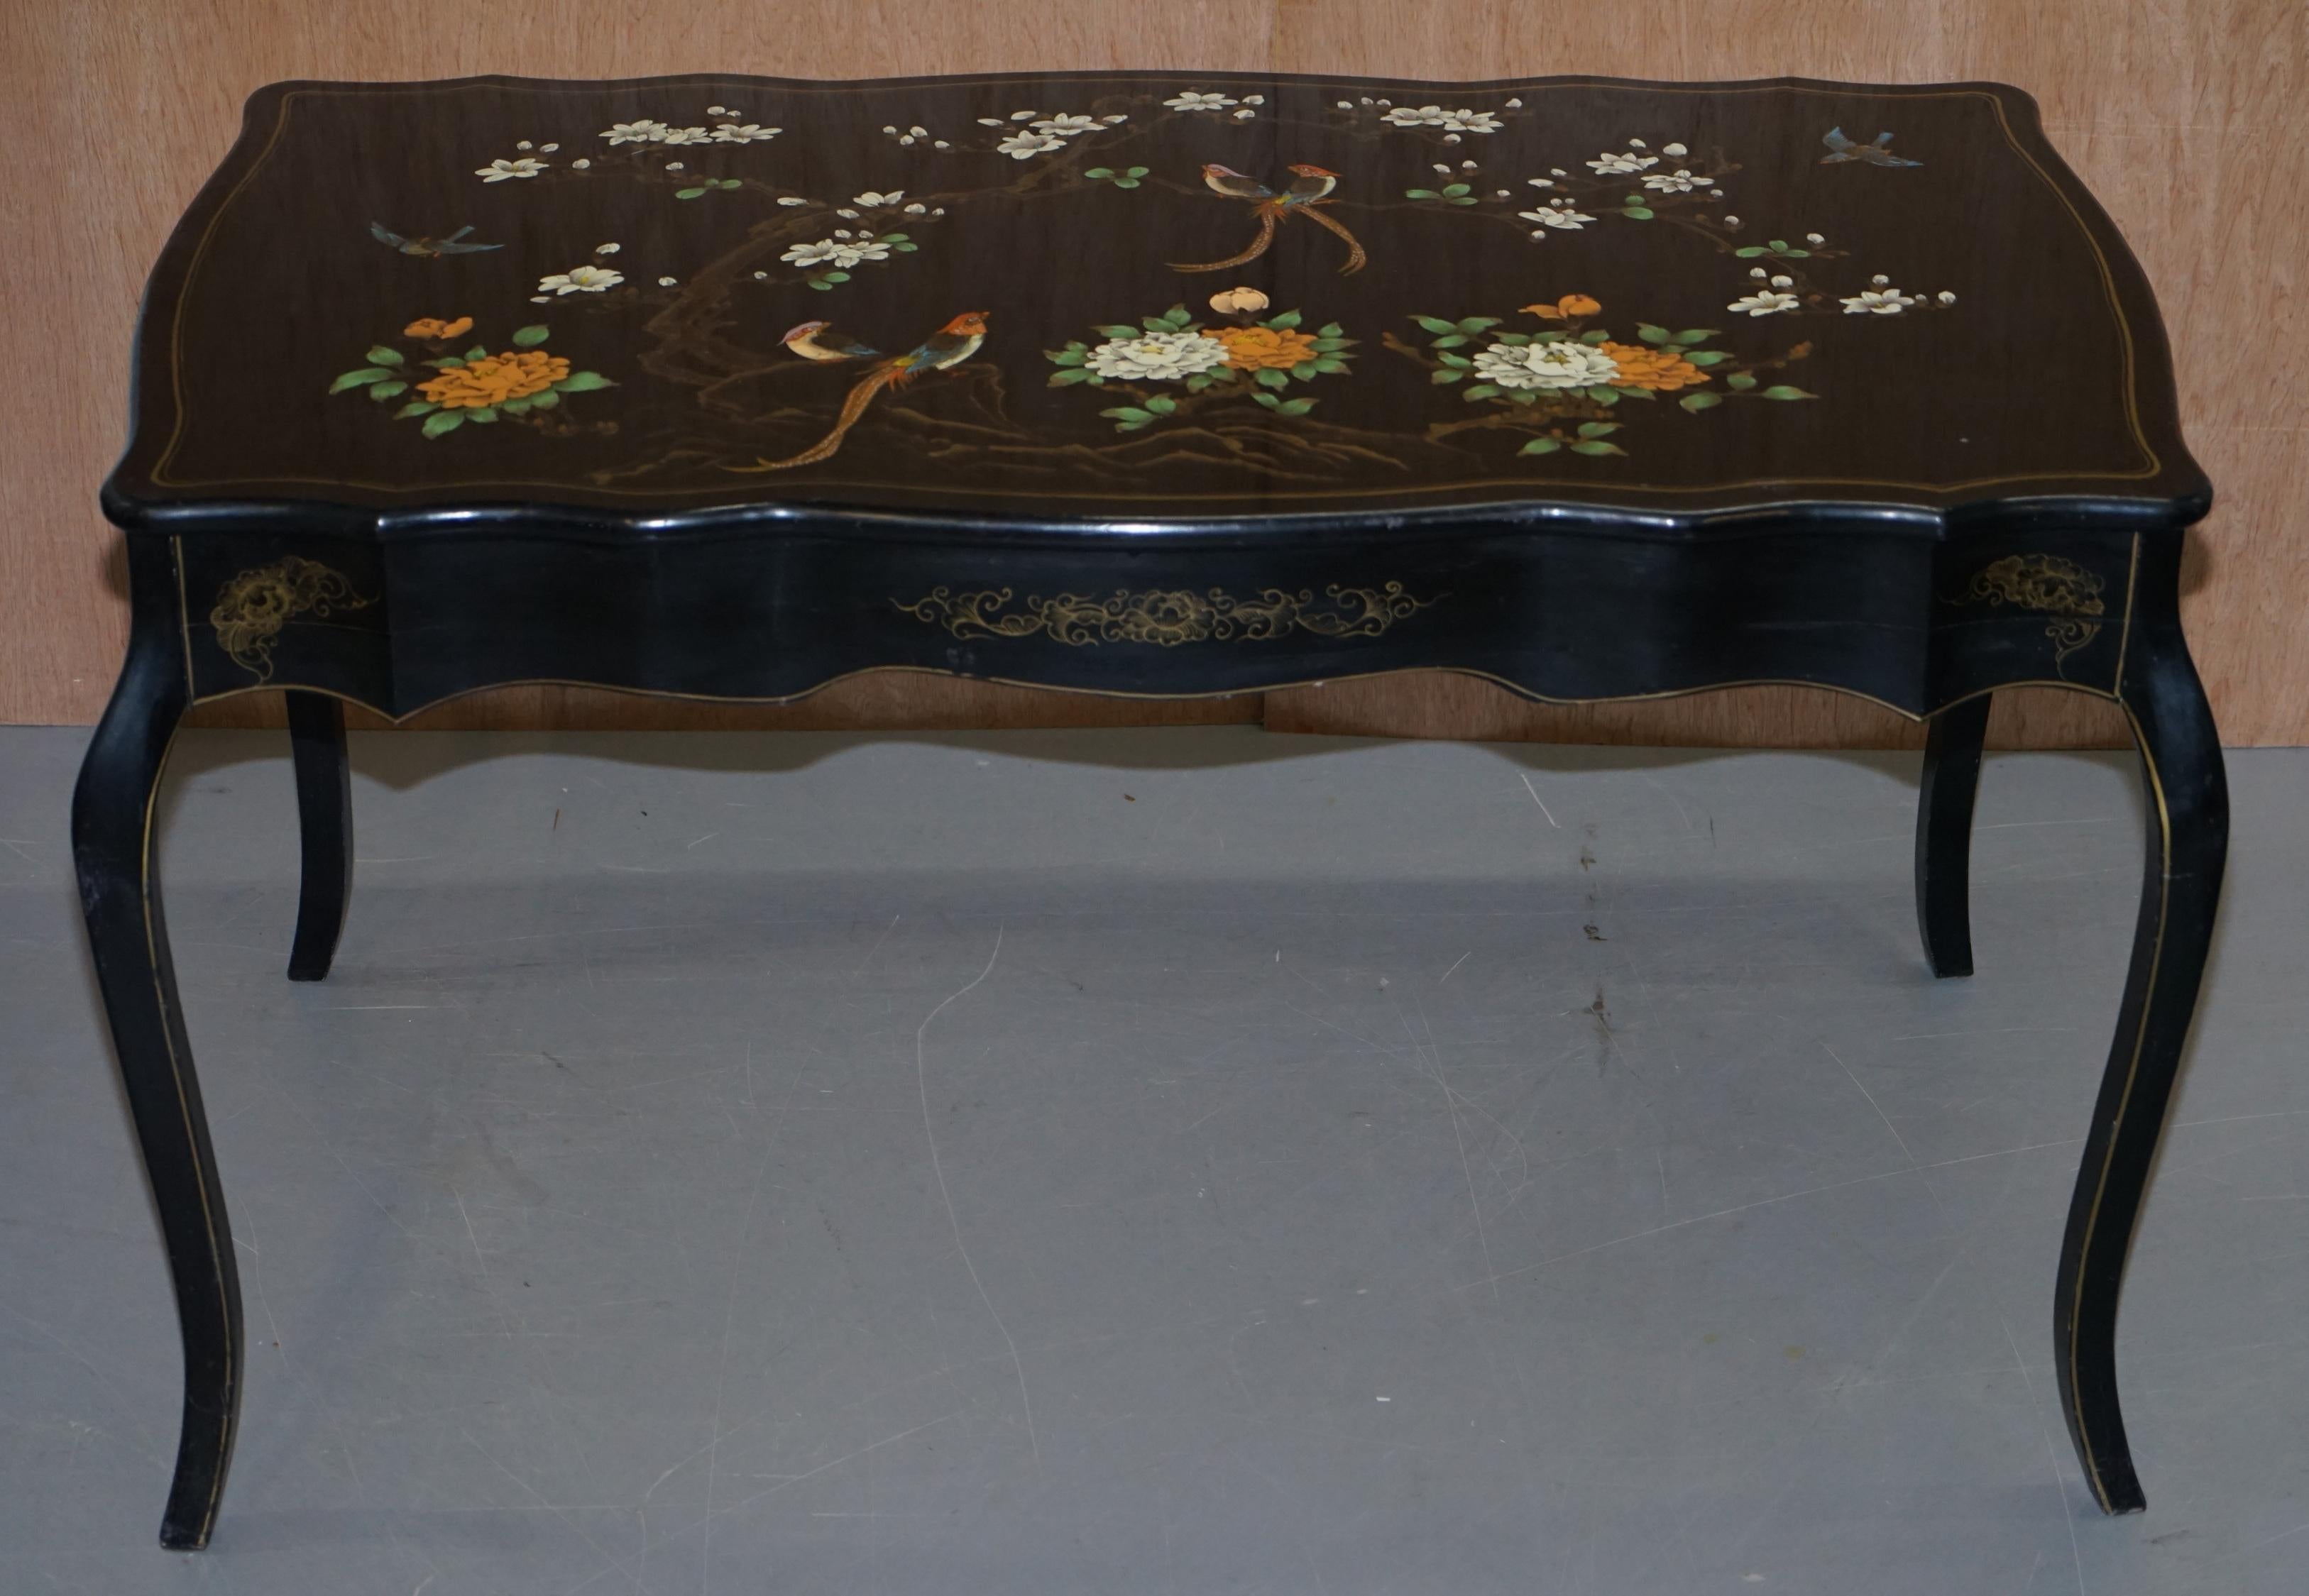 Chinoiserie Stunning Black Lacquered Polychrome Painted Writing Table Desk Birds Flowers For Sale